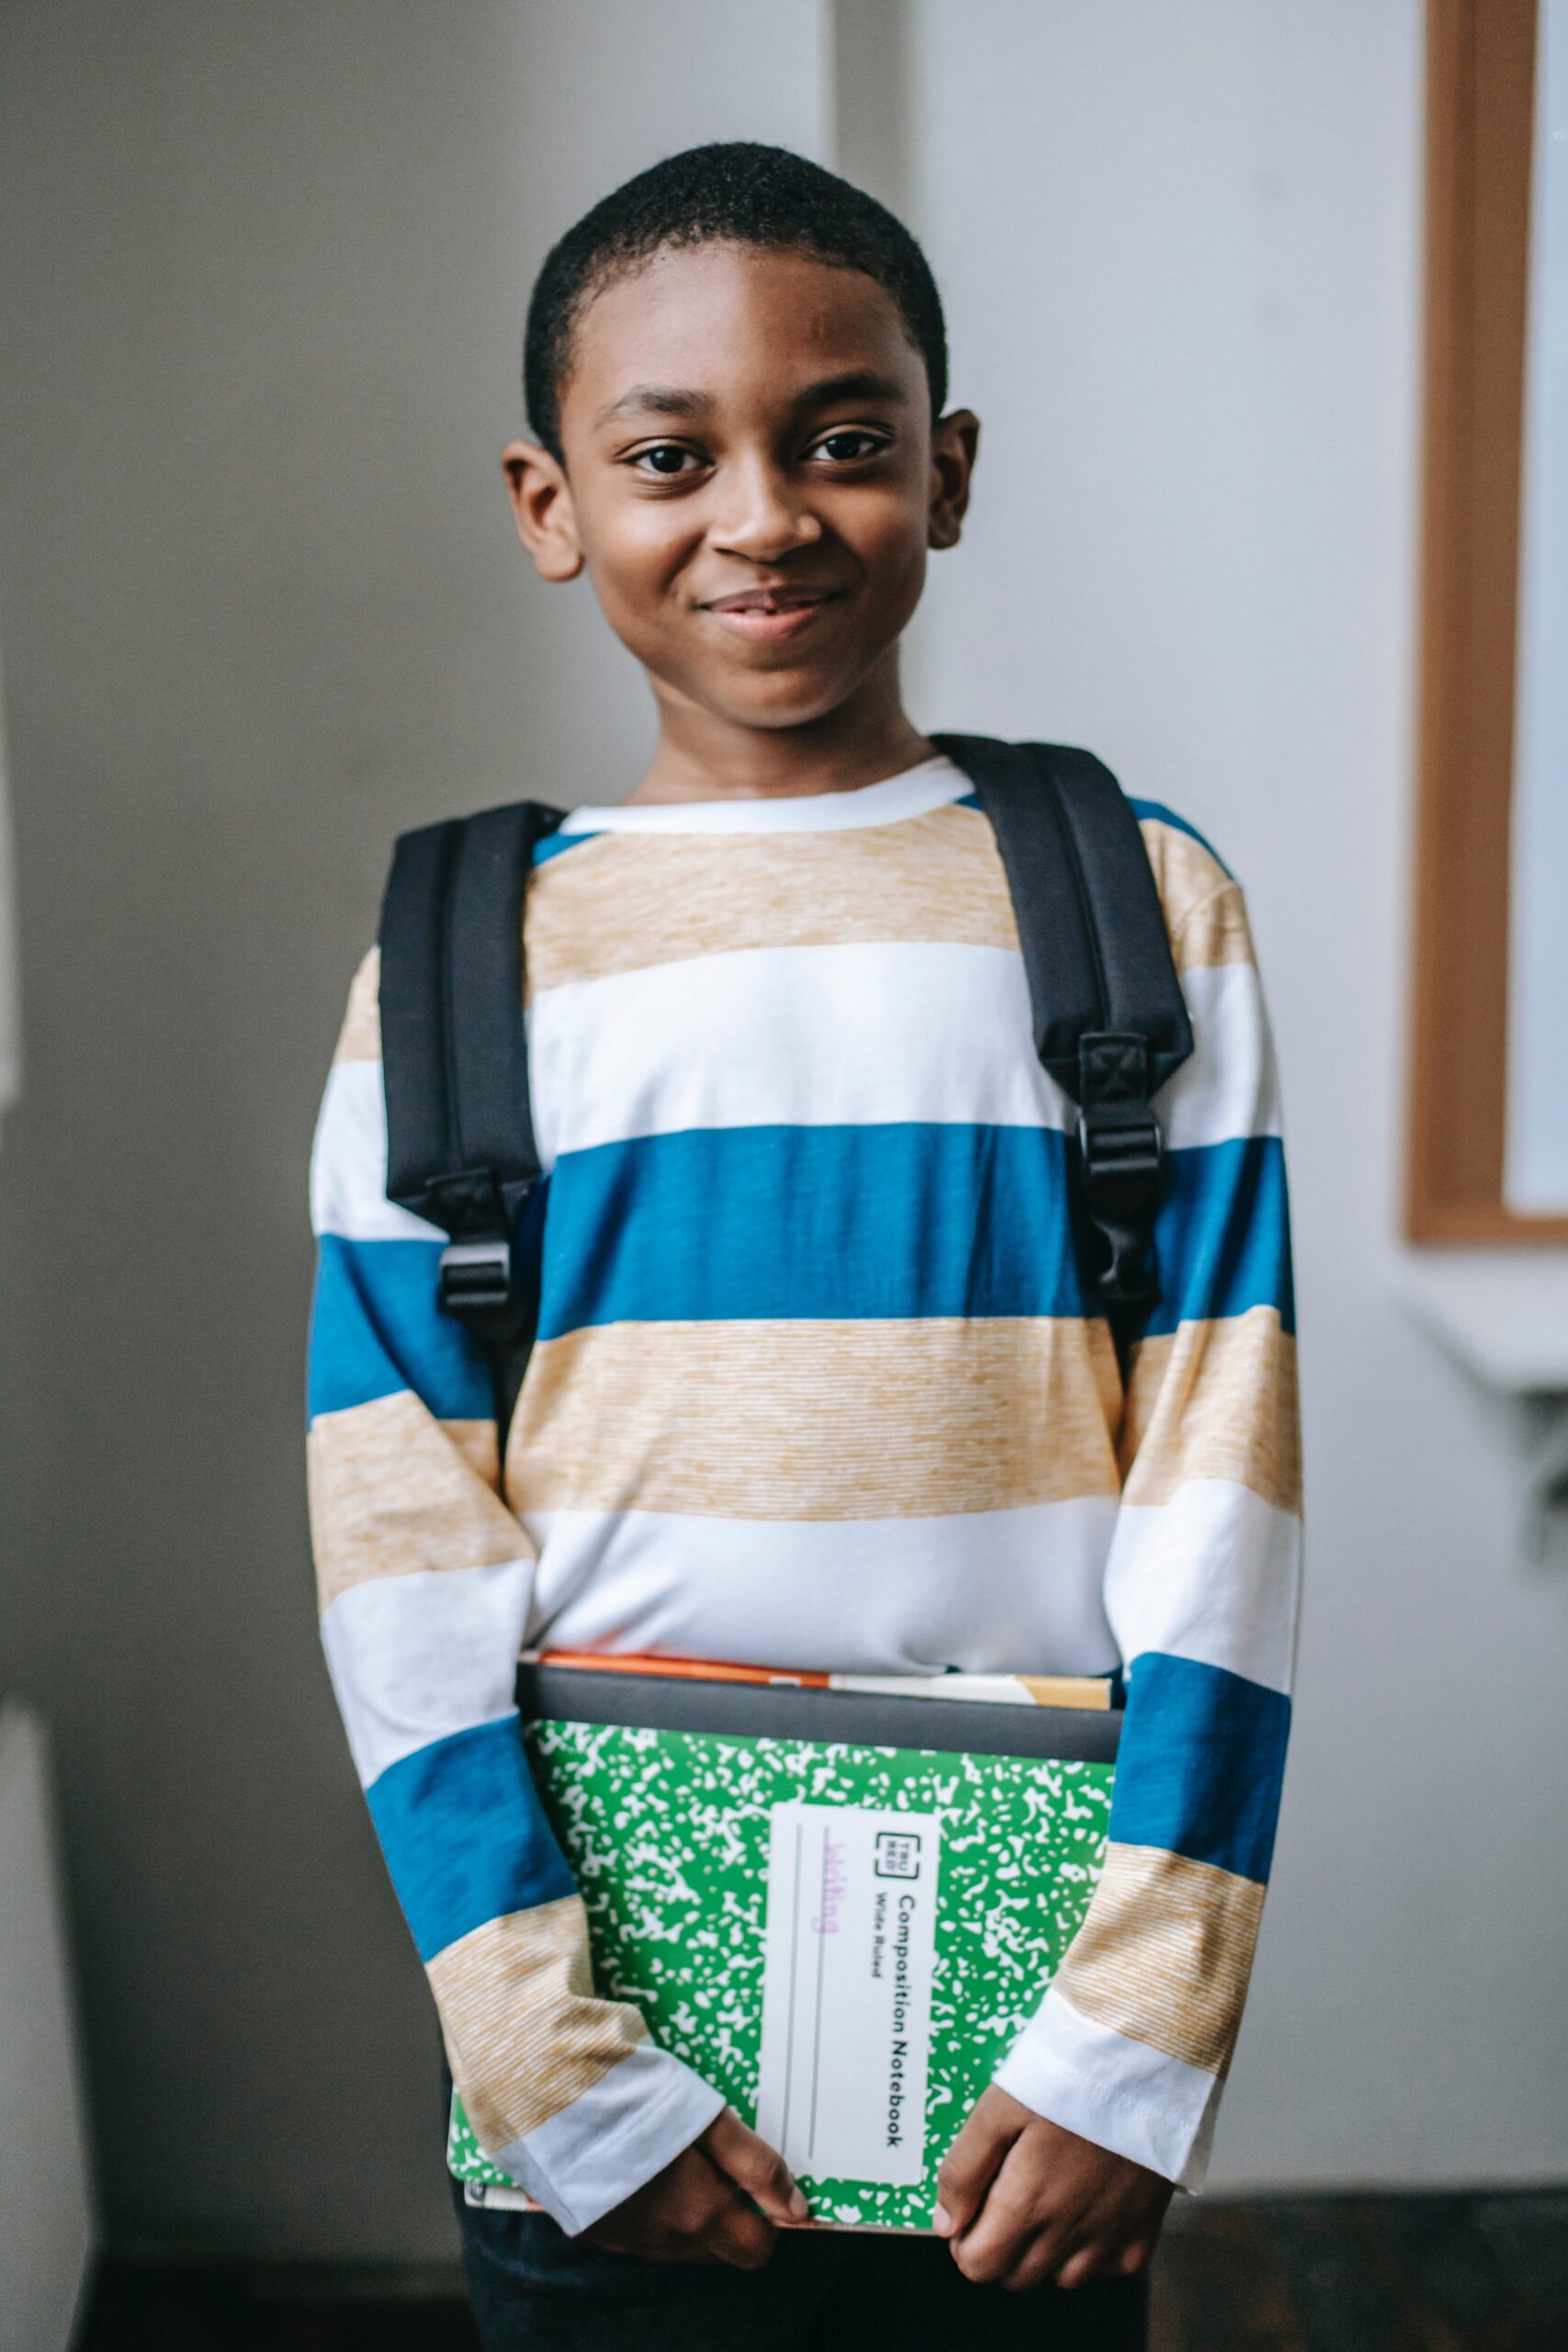 young boy smiling wearing backpack and holding notebook